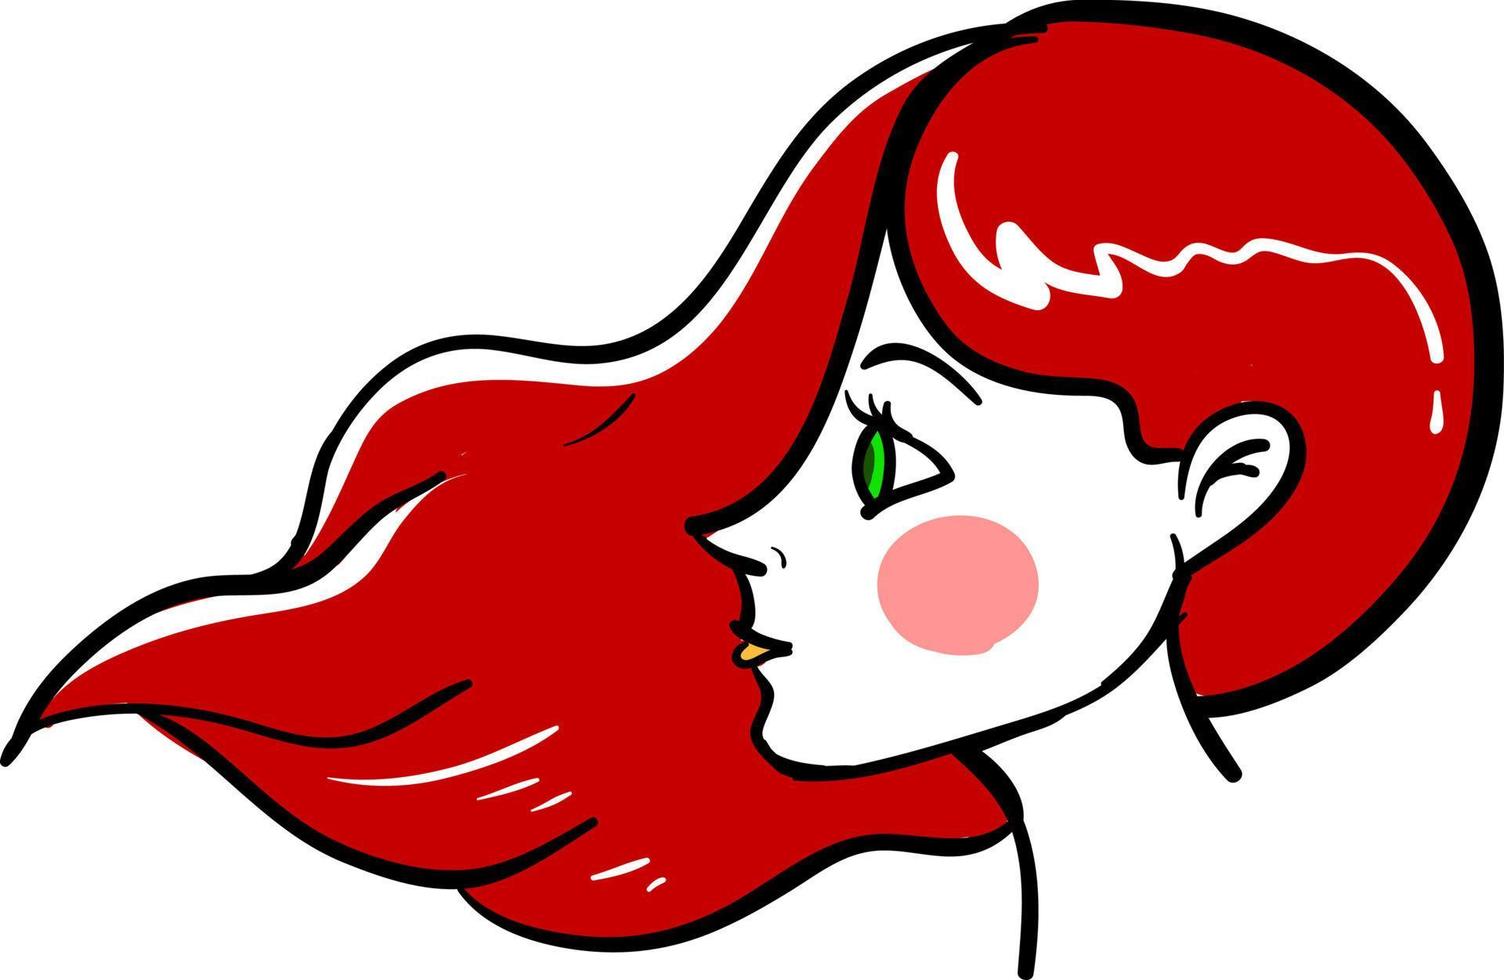 Girl with red hair, illustration, vector on white background